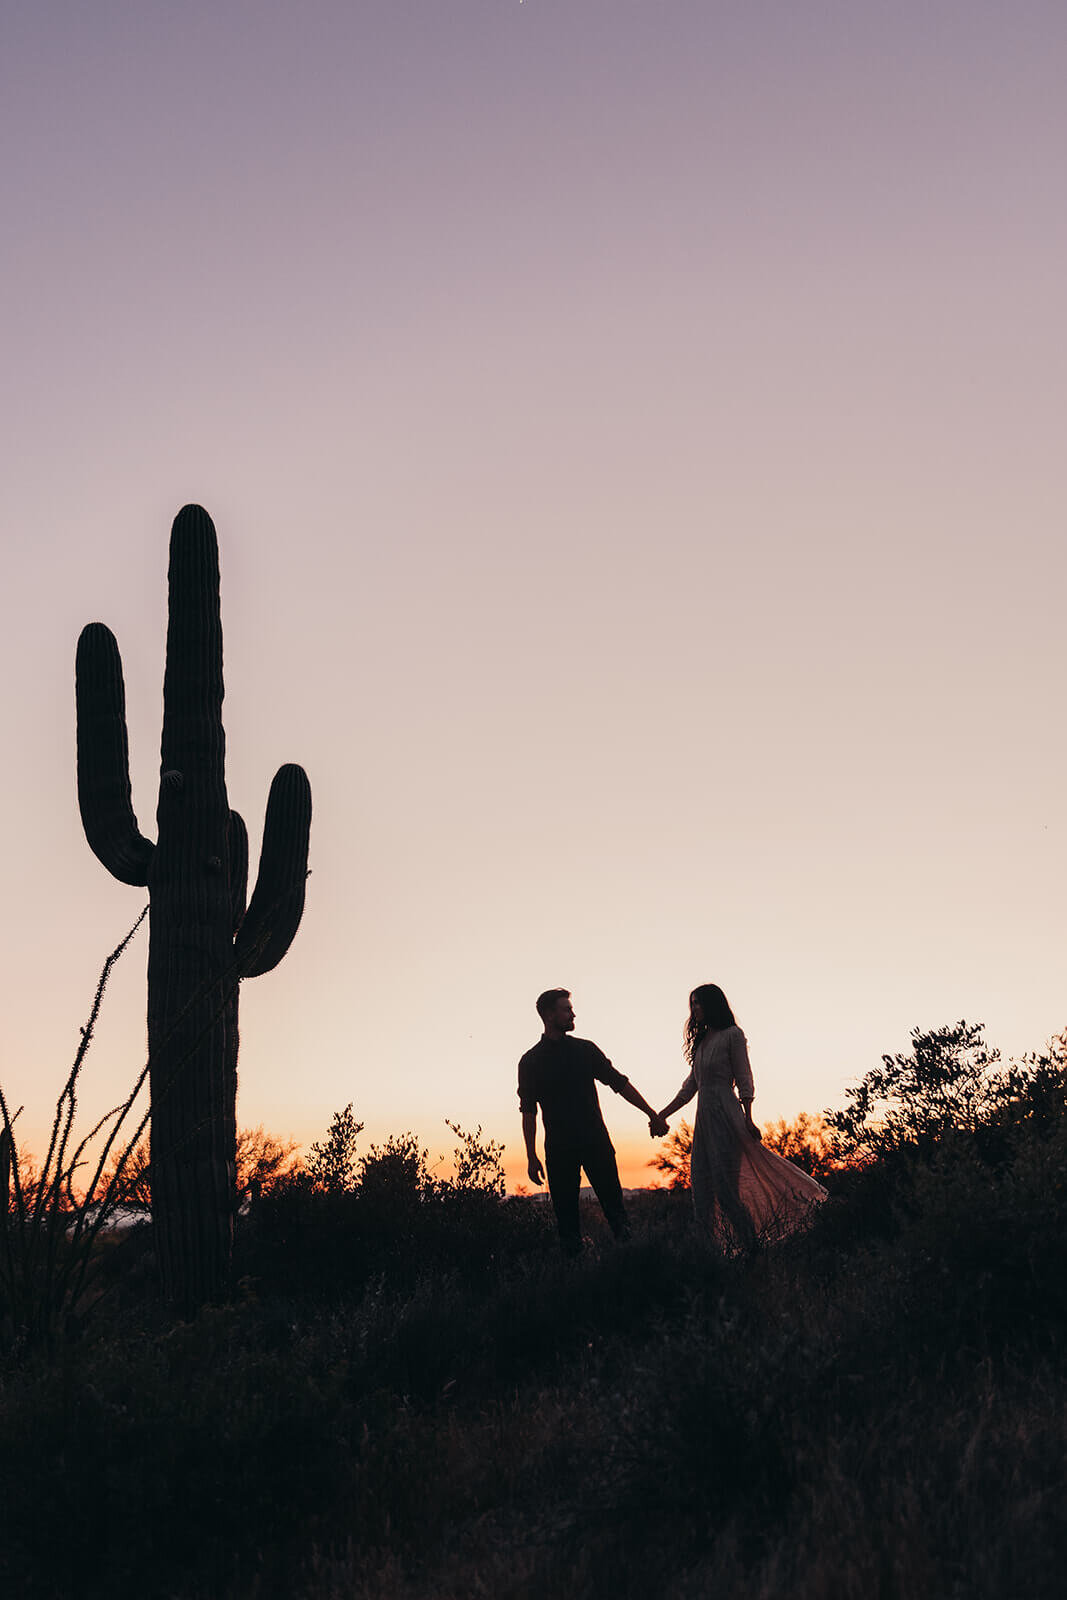  Couple hikes through desert wonderland during sunset during their engagement session in the Superstition Mountains outside of Phoenix, Arizona. Phoenix elopement photographer 